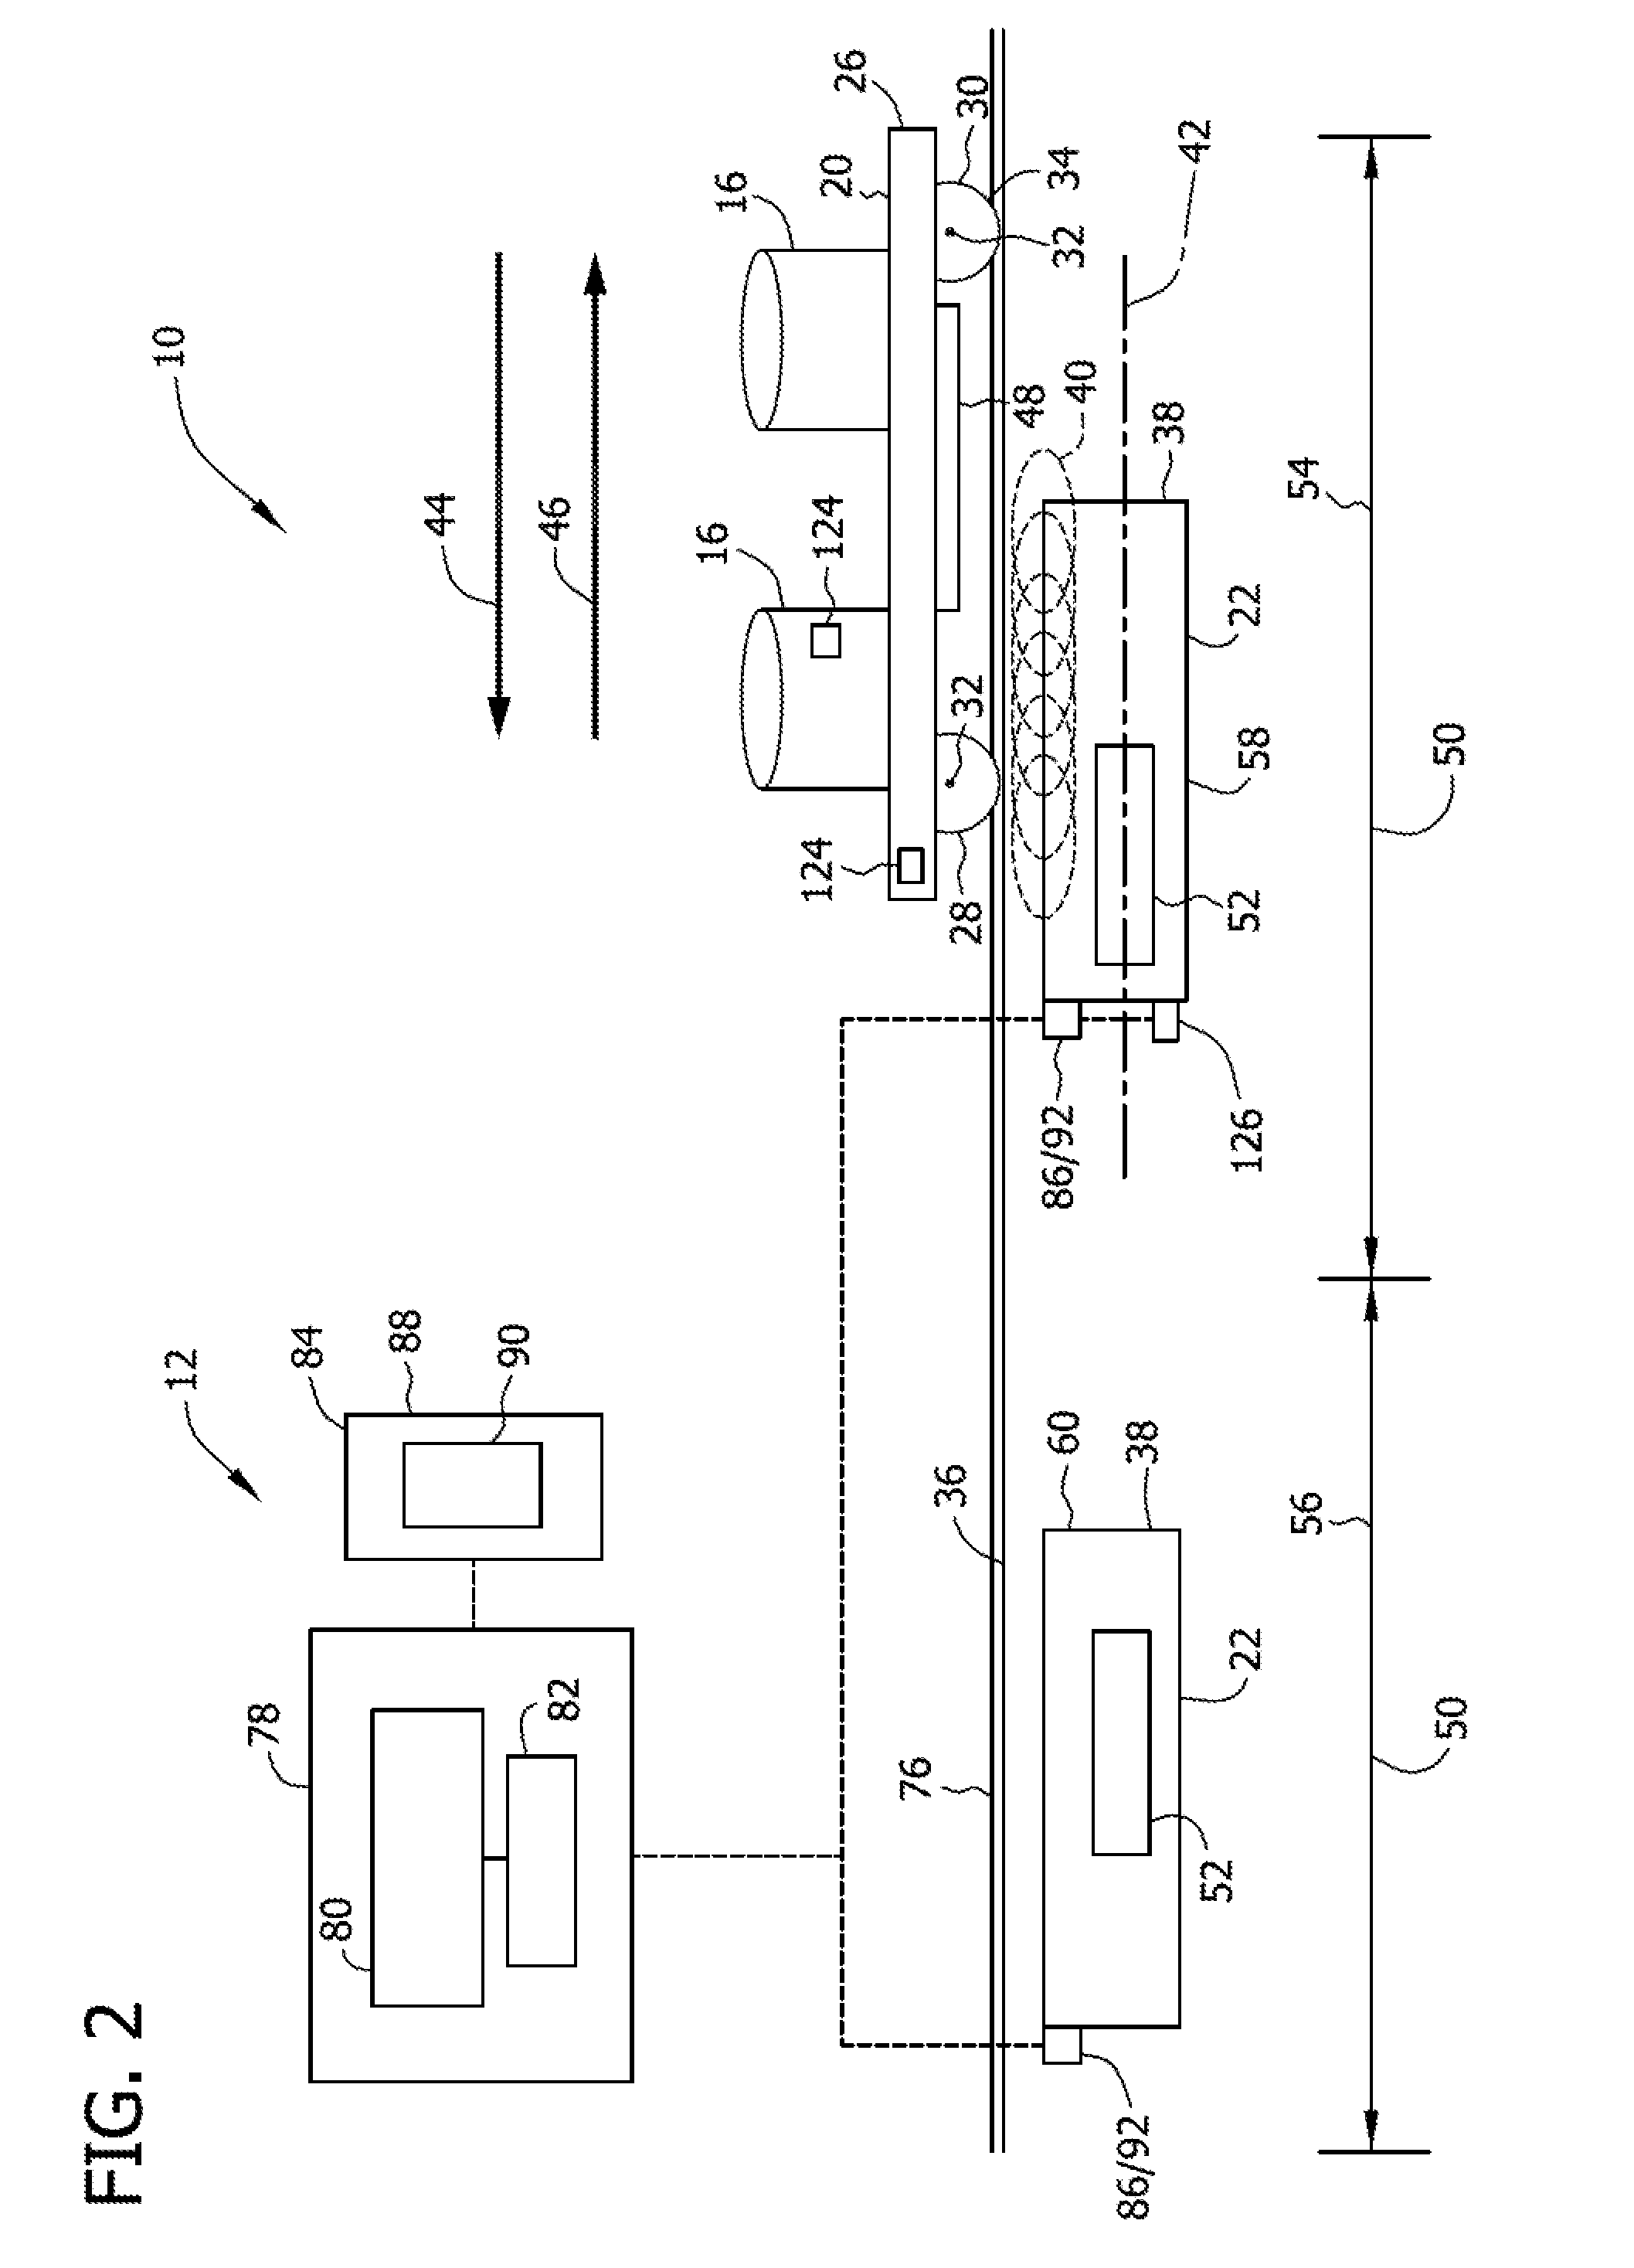 Transport and handling system and methods of transporting a commodity